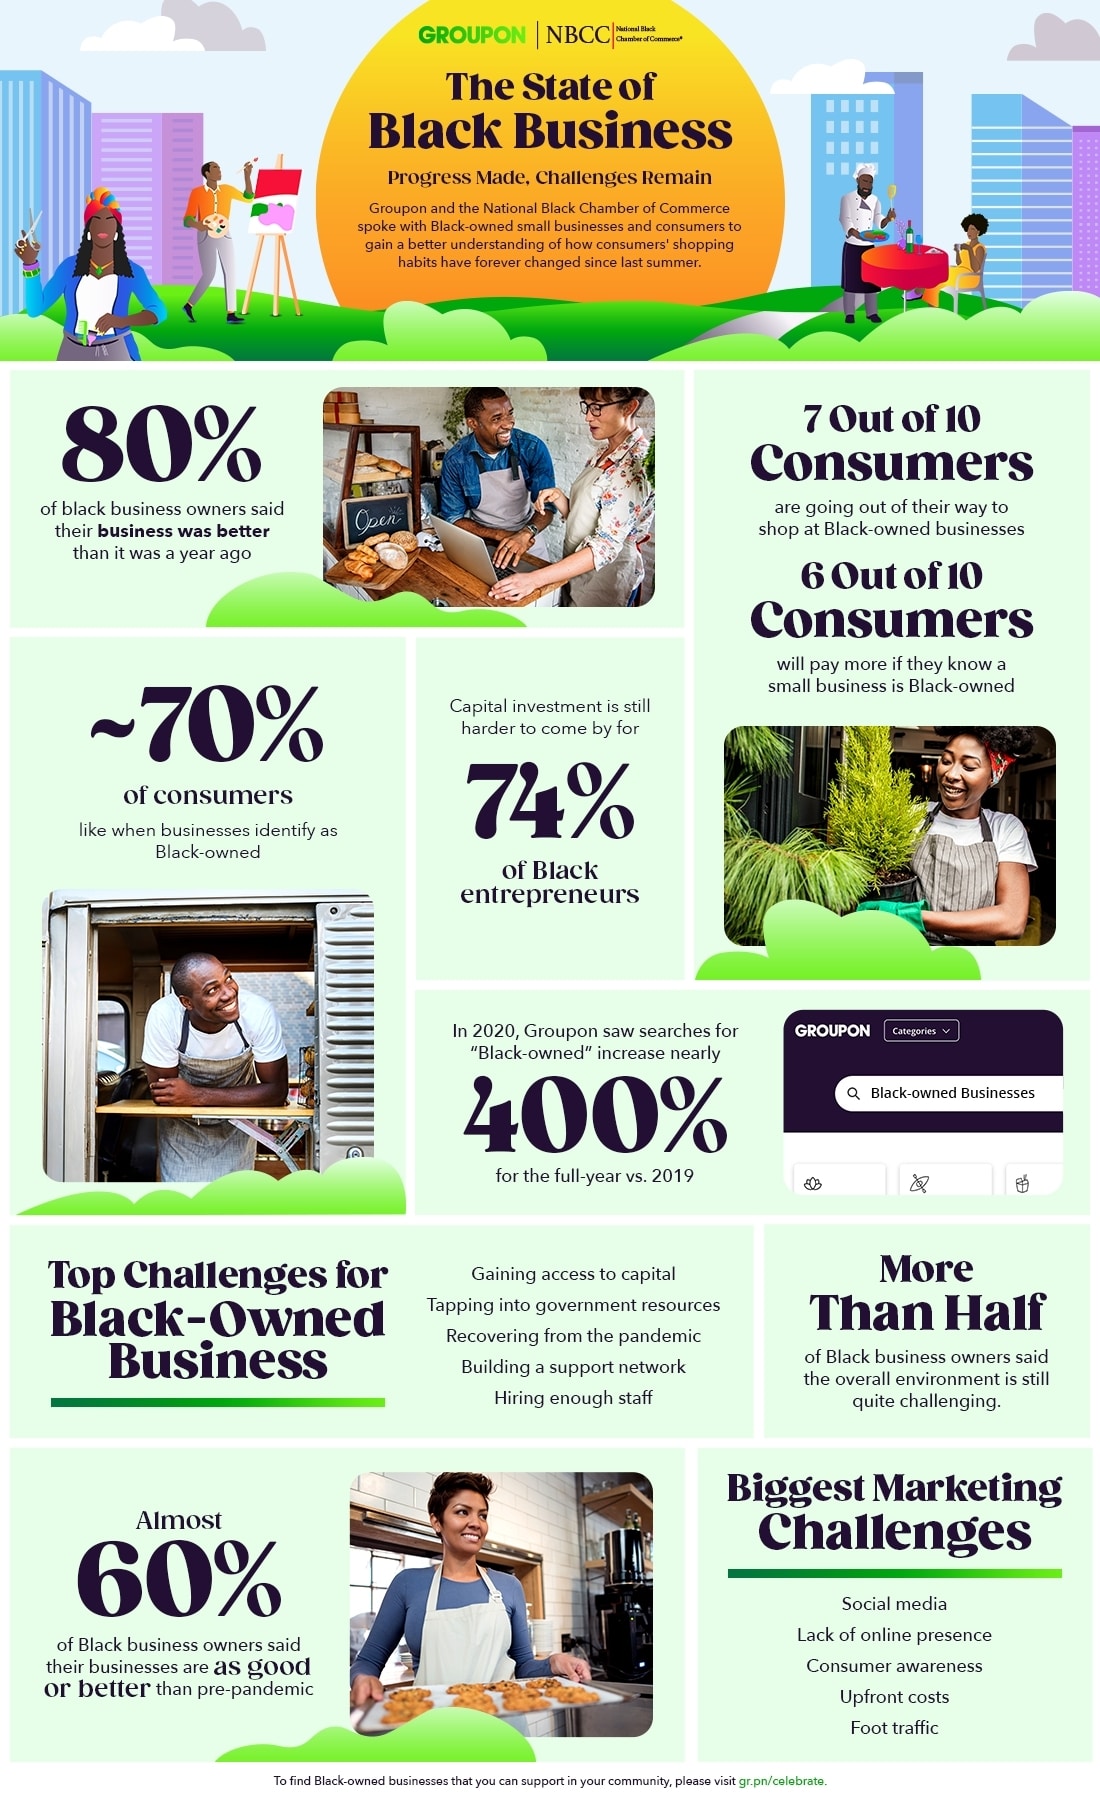 The state of Black business in America: New survey finds progress, challenges